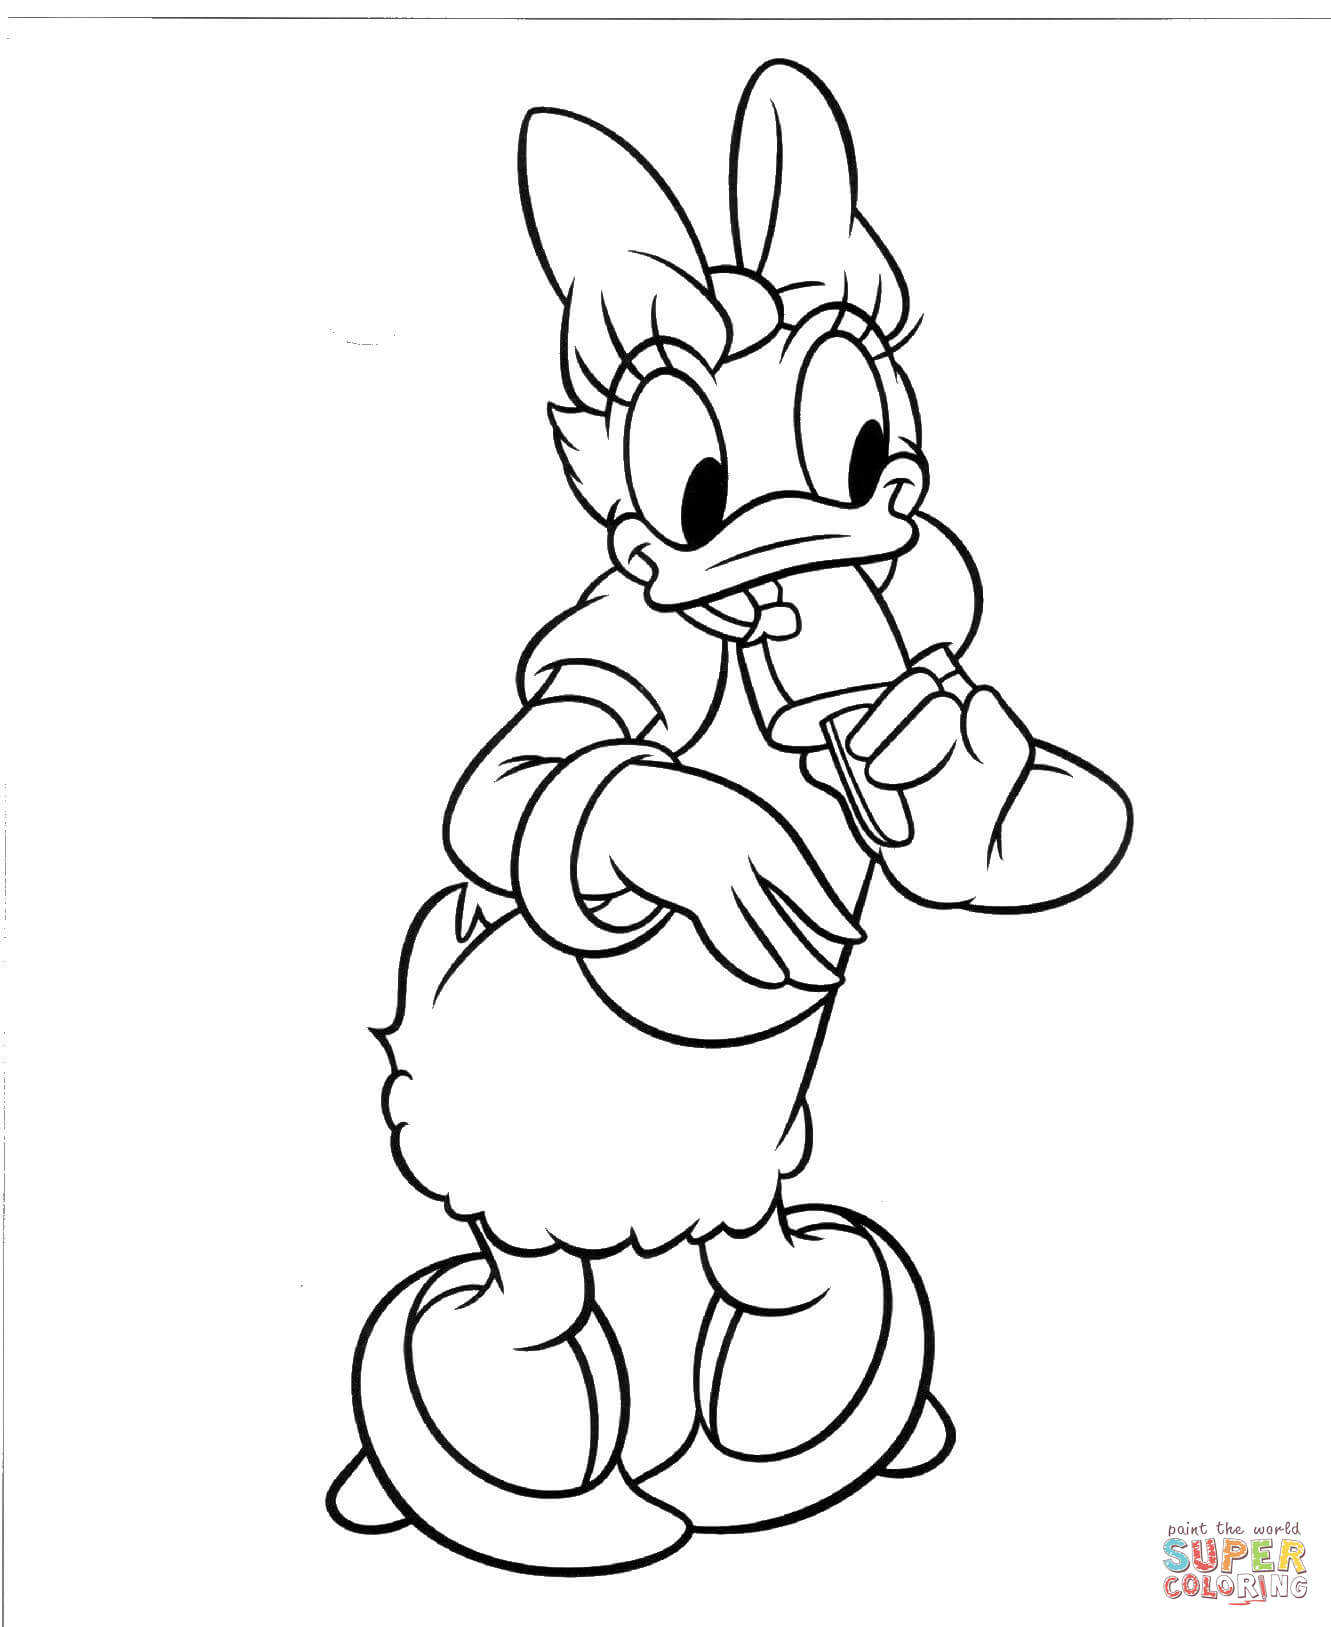 Donald Duck's Girlfriend coloring page | Free Printable Coloring Pages